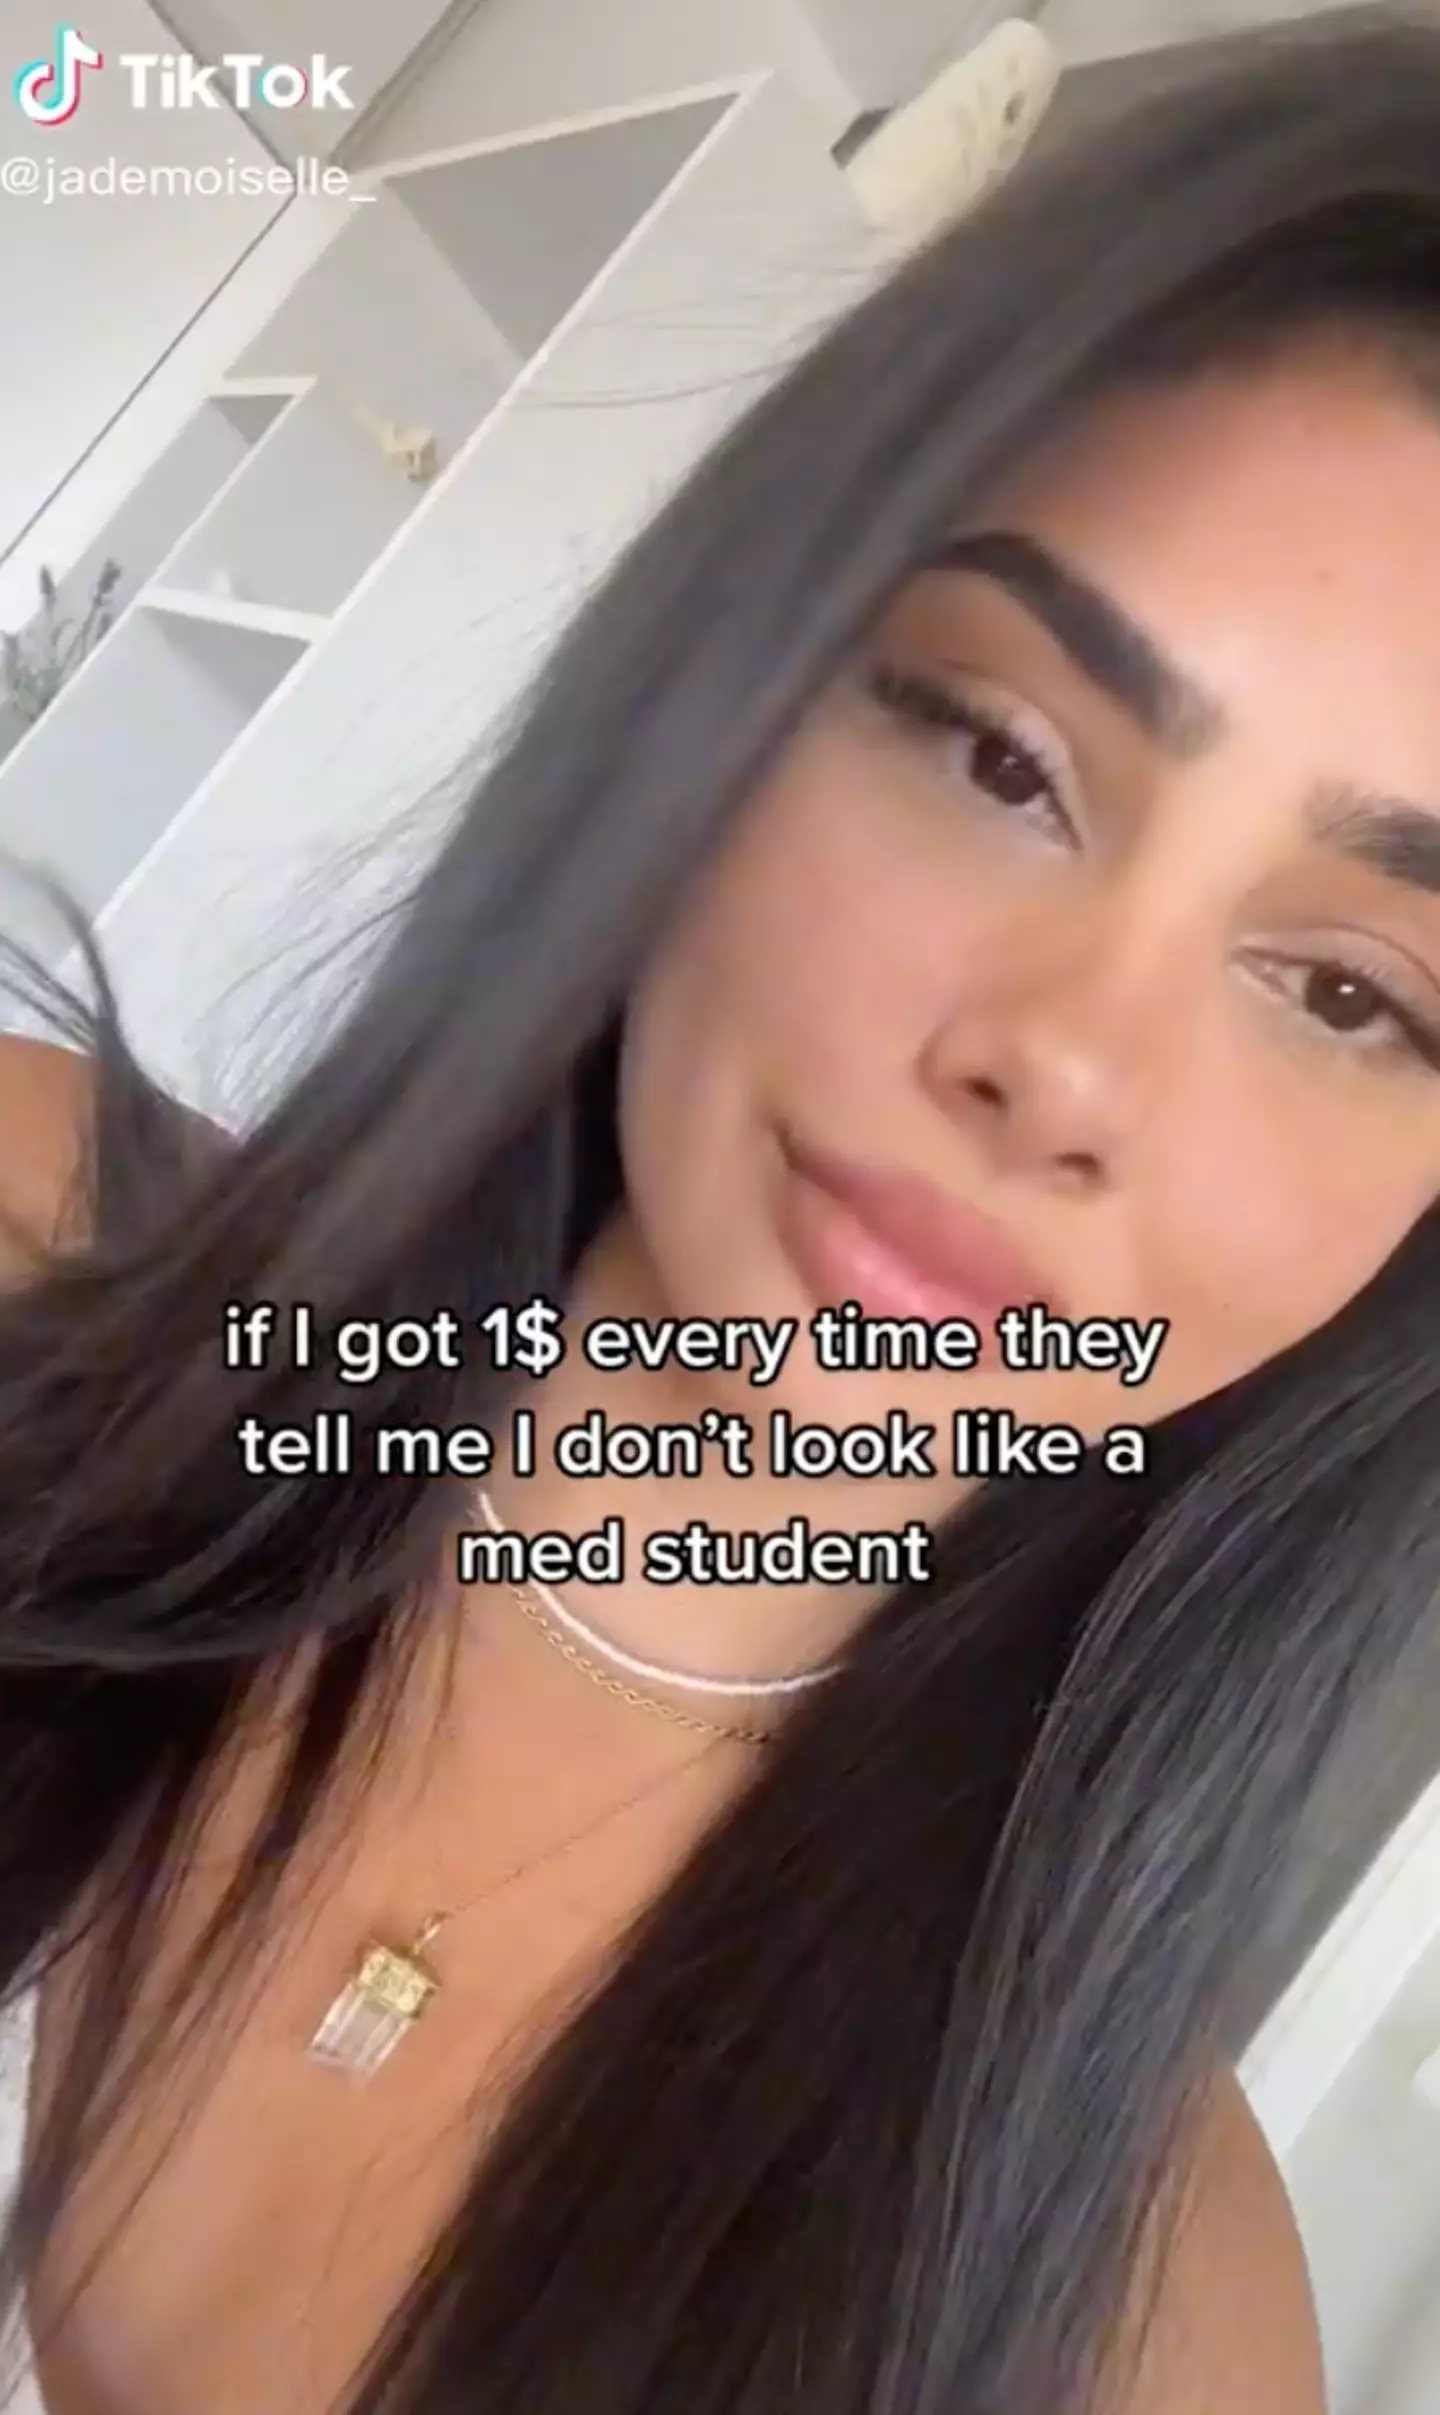 Jasmine took to TikTok to vent about the fact she’s often told ‘she doesn't look like a medical student’.